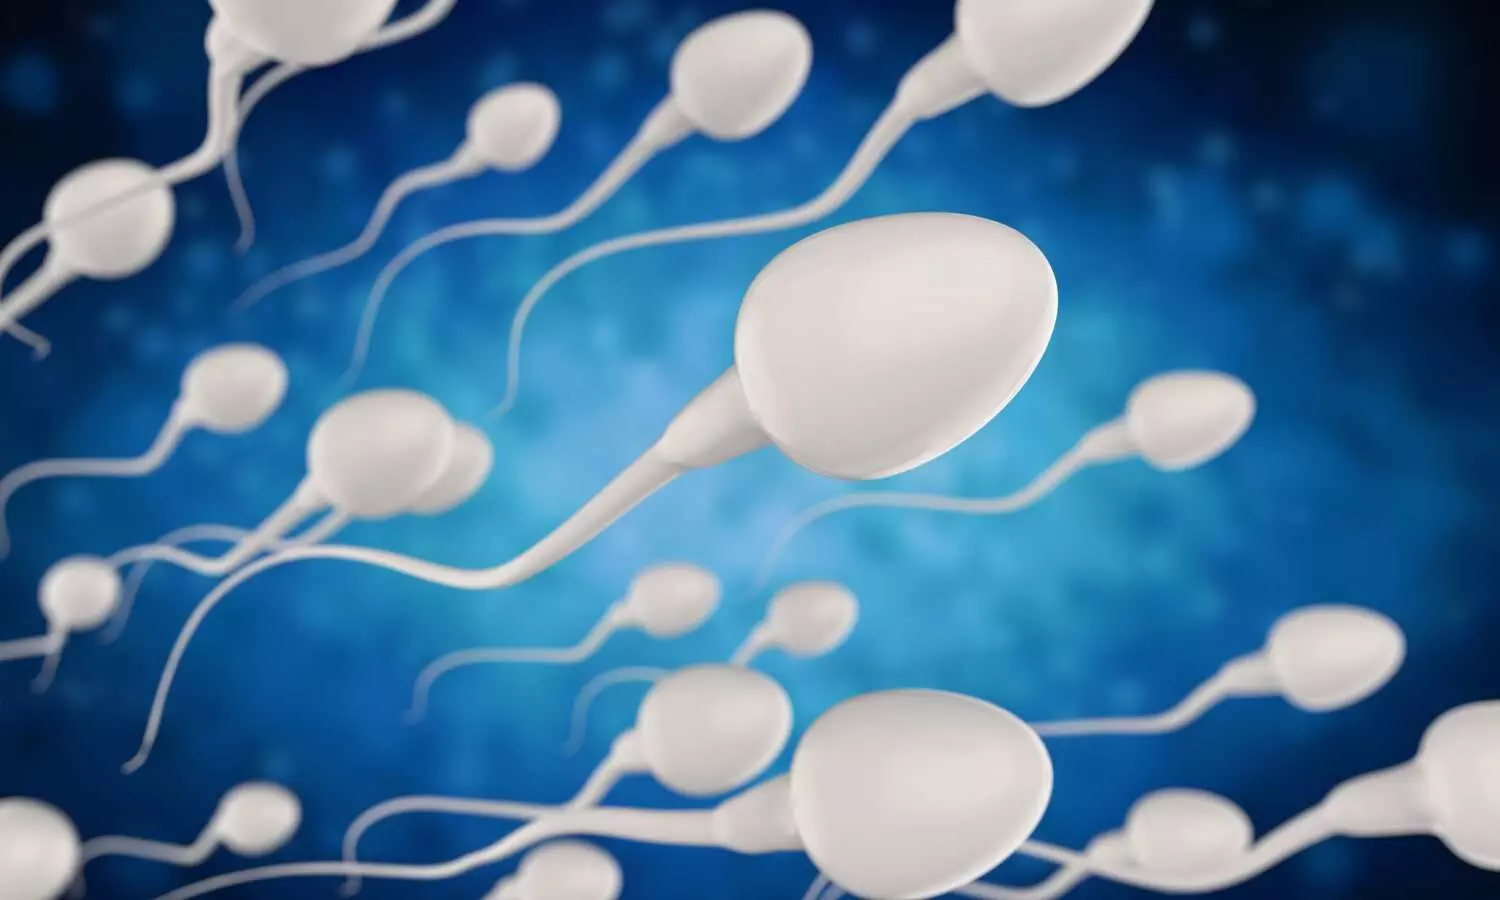 Over 50 percent decline in sperm counts Globally in last 46 years, even in India: Study